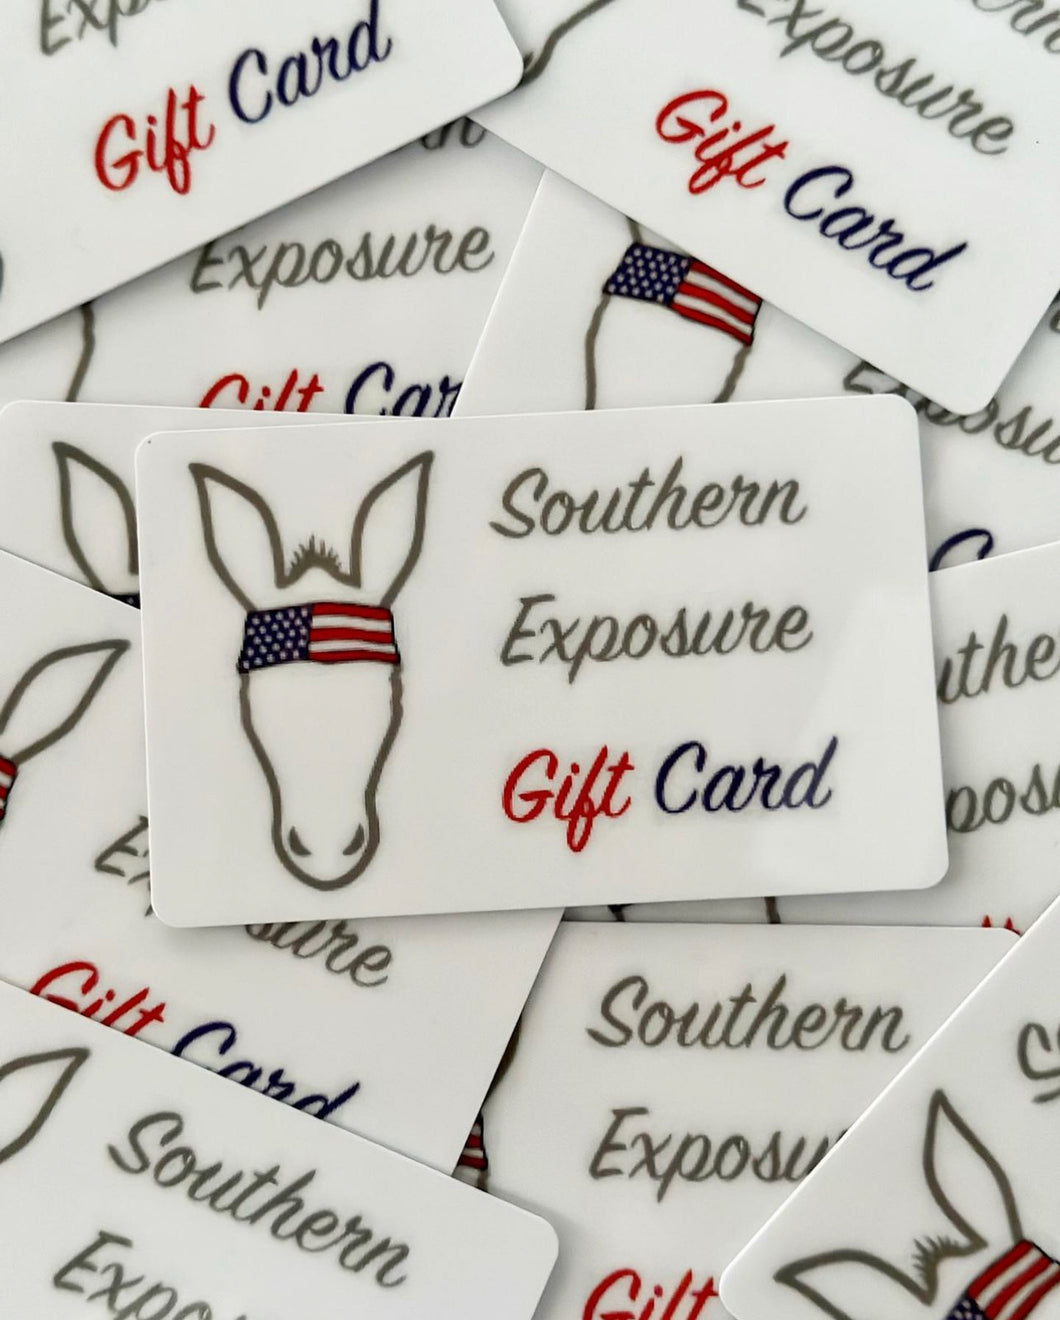 Southern Exposure-Gift Card